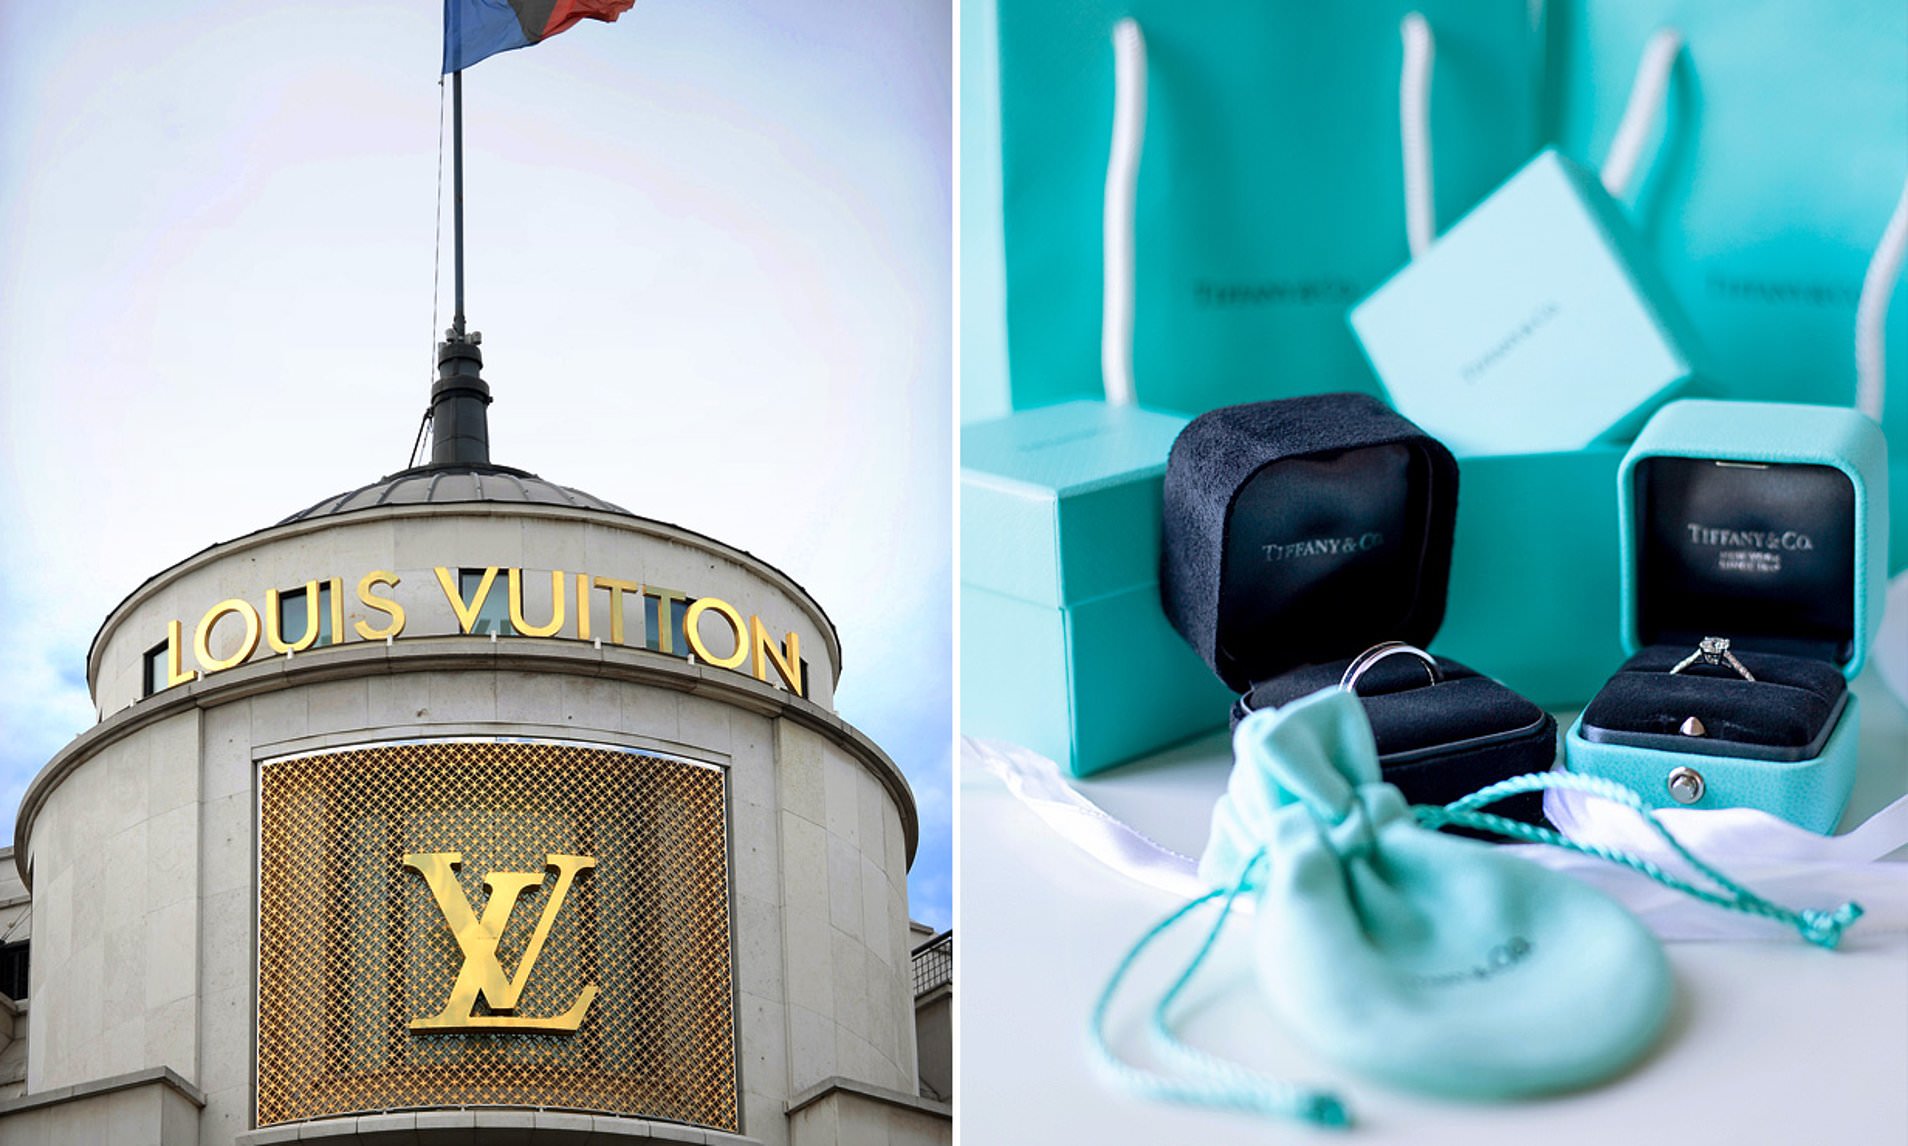 French Luxury Group LVMH Acquires Tiffany & Co. for $16.2 Billion